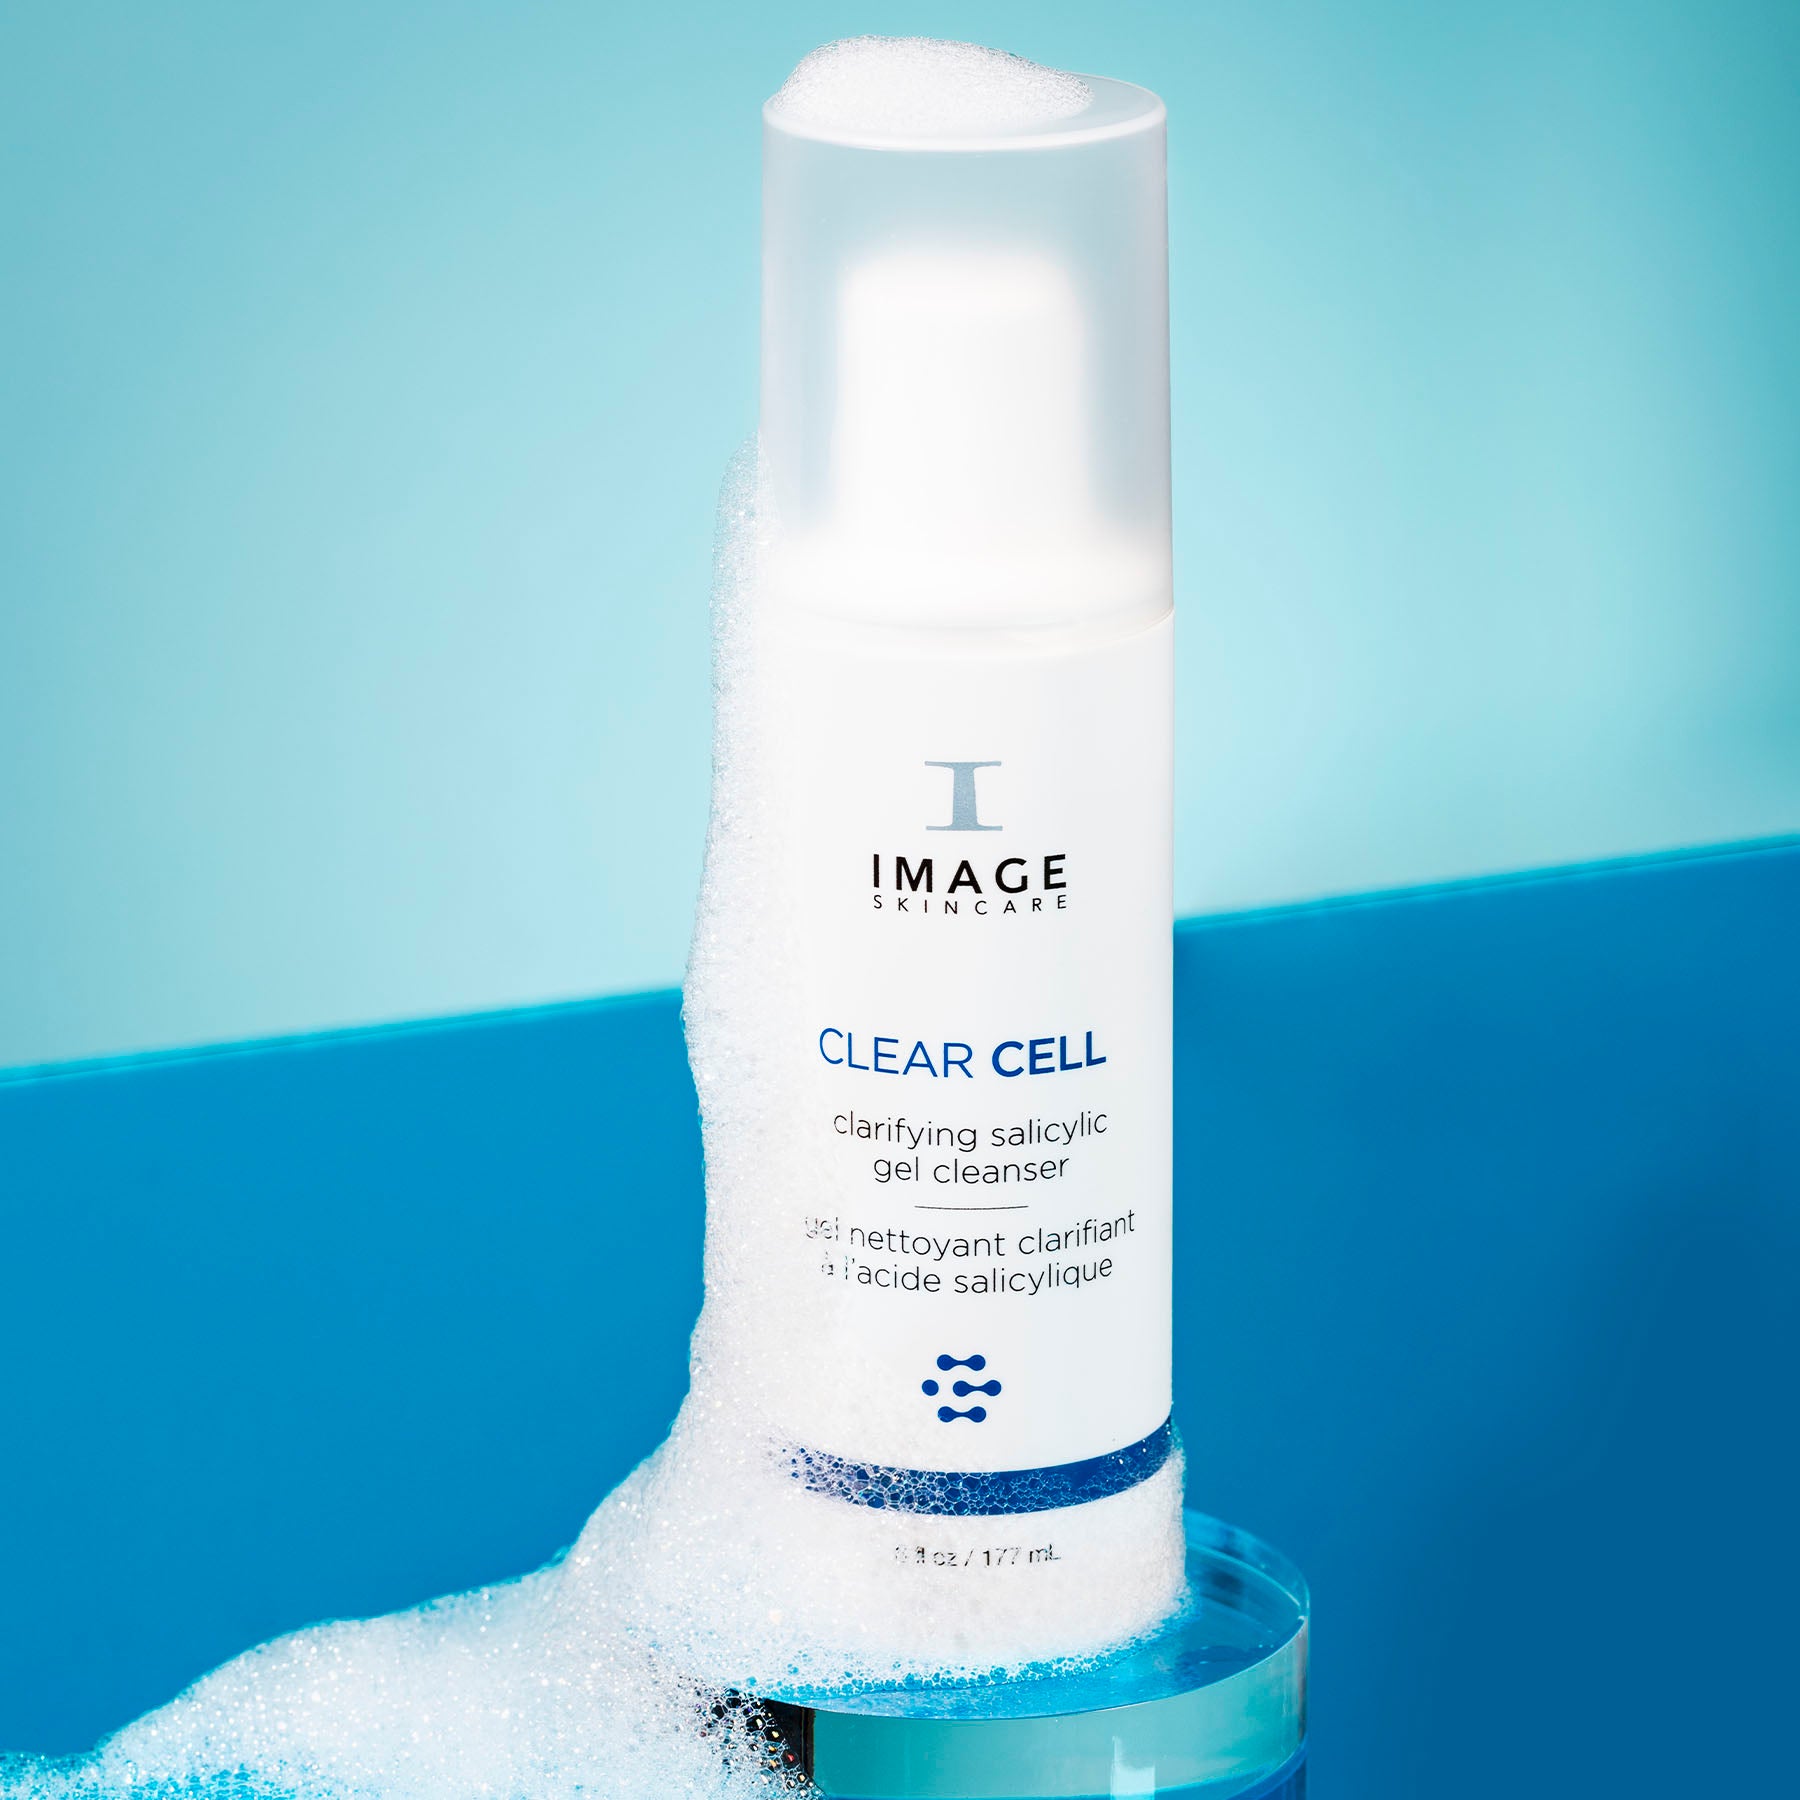 https://imageskincare.com/cdn/shop/products/CLEAR-CELL-CLARIFYING-SALICYLIC-GEL-CLEANSER-PDP-R06.jpg?v=1679085452&width=1800